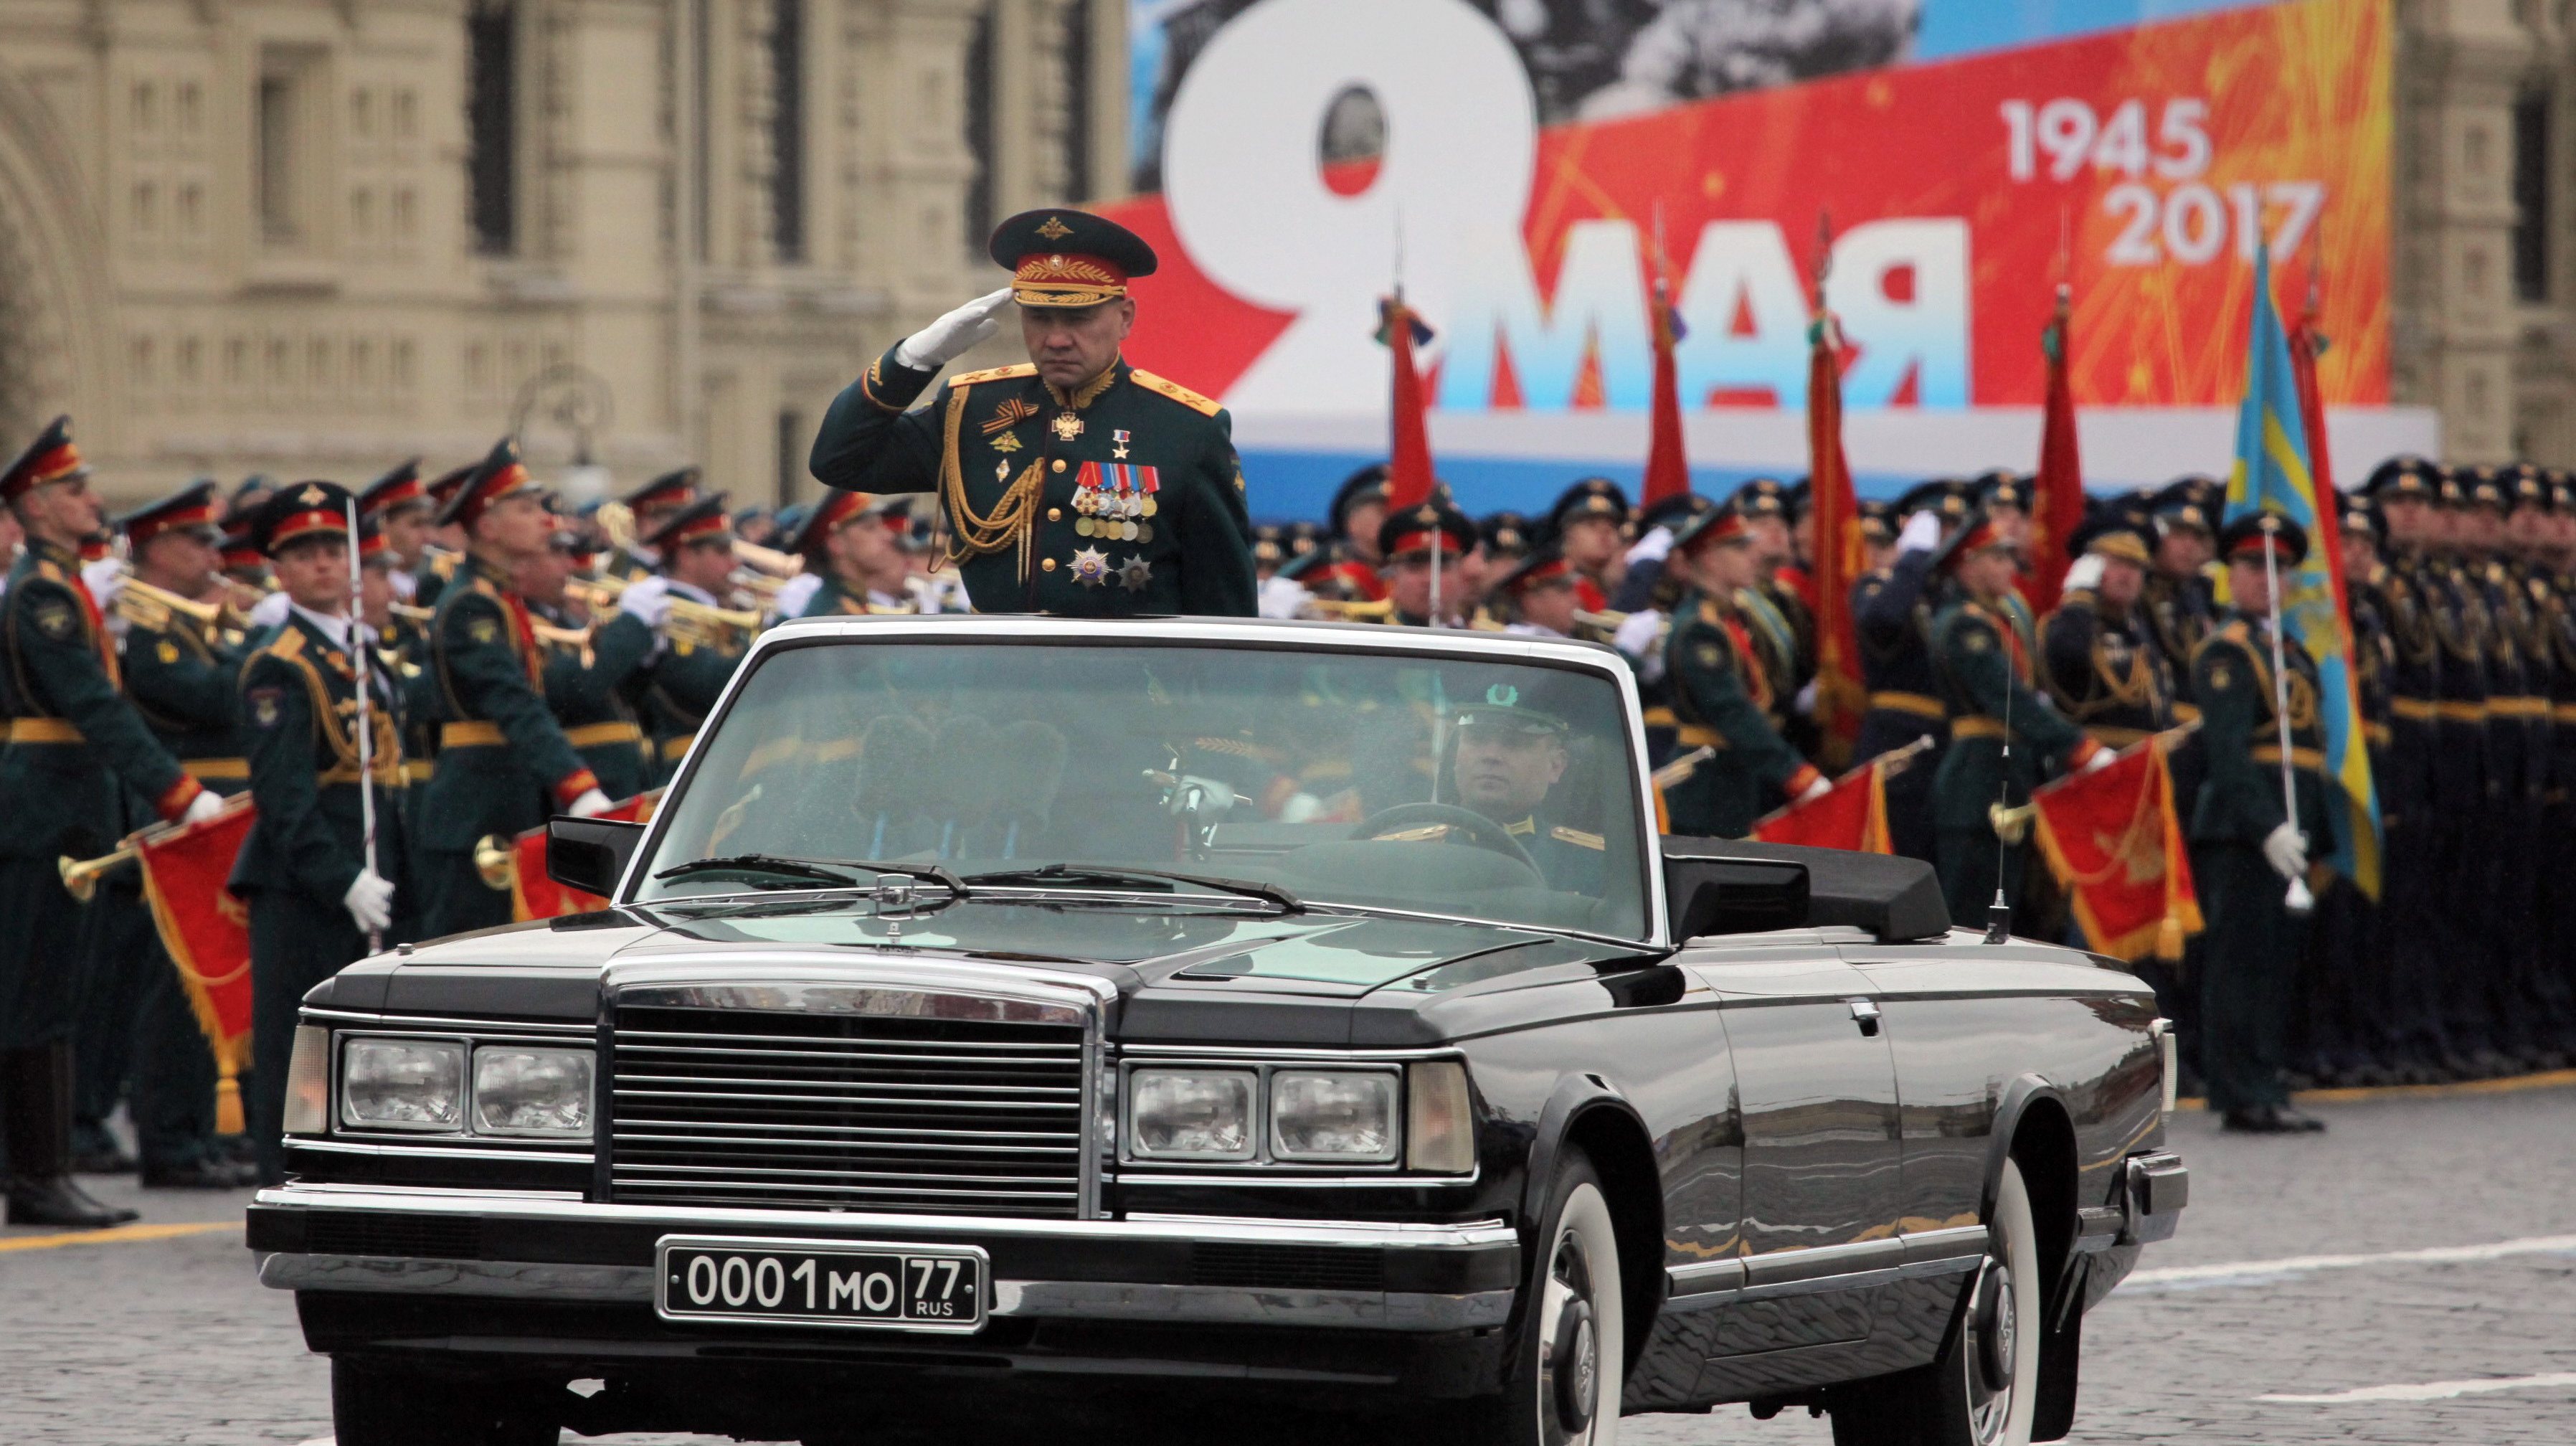 Russia marks the 72nd anniversary of Victory Day